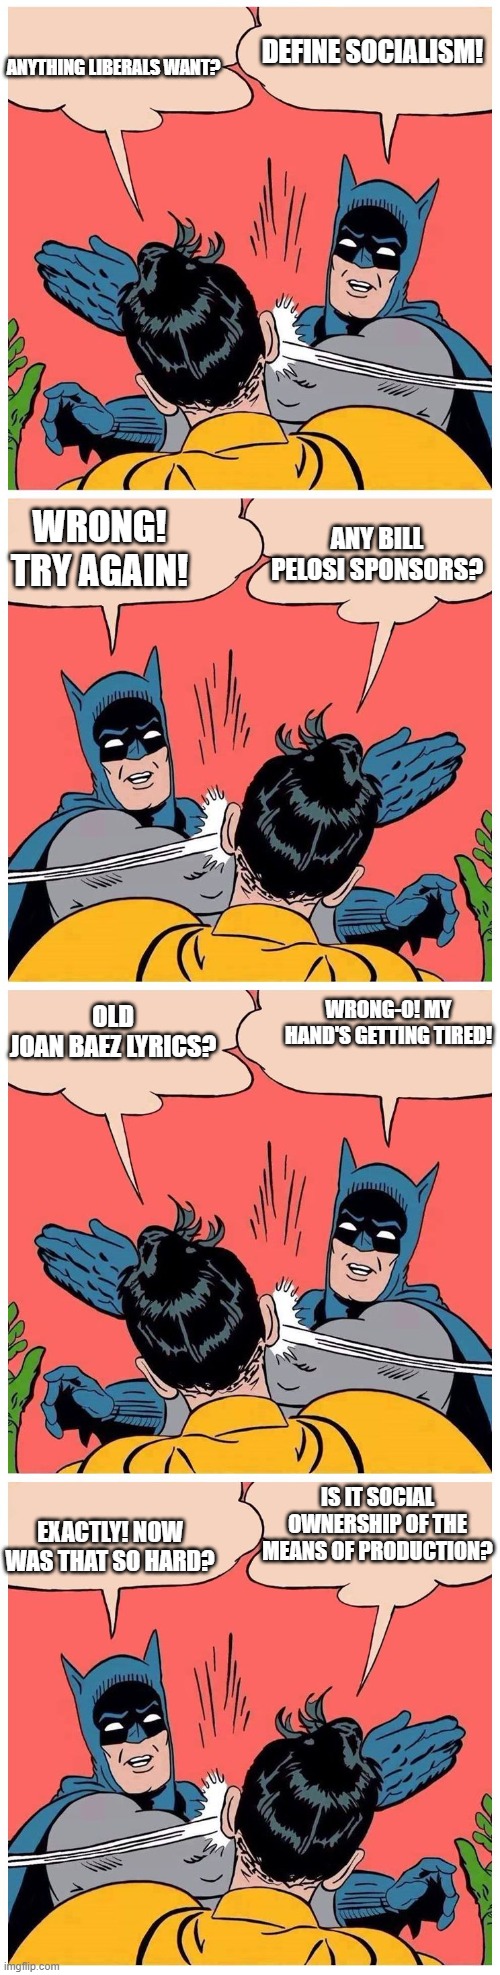 Batman slaps robin again and again | ANYTHING LIBERALS WANT? DEFINE SOCIALISM! WRONG! TRY AGAIN! ANY BILL PELOSI SPONSORS? OLD JOAN BAEZ LYRICS? WRONG-O! MY HAND'S GETTING TIRED! IS IT SOCIAL OWNERSHIP OF THE MEANS OF PRODUCTION? EXACTLY! NOW WAS THAT SO HARD? | image tagged in batman slaps robin again and again | made w/ Imgflip meme maker